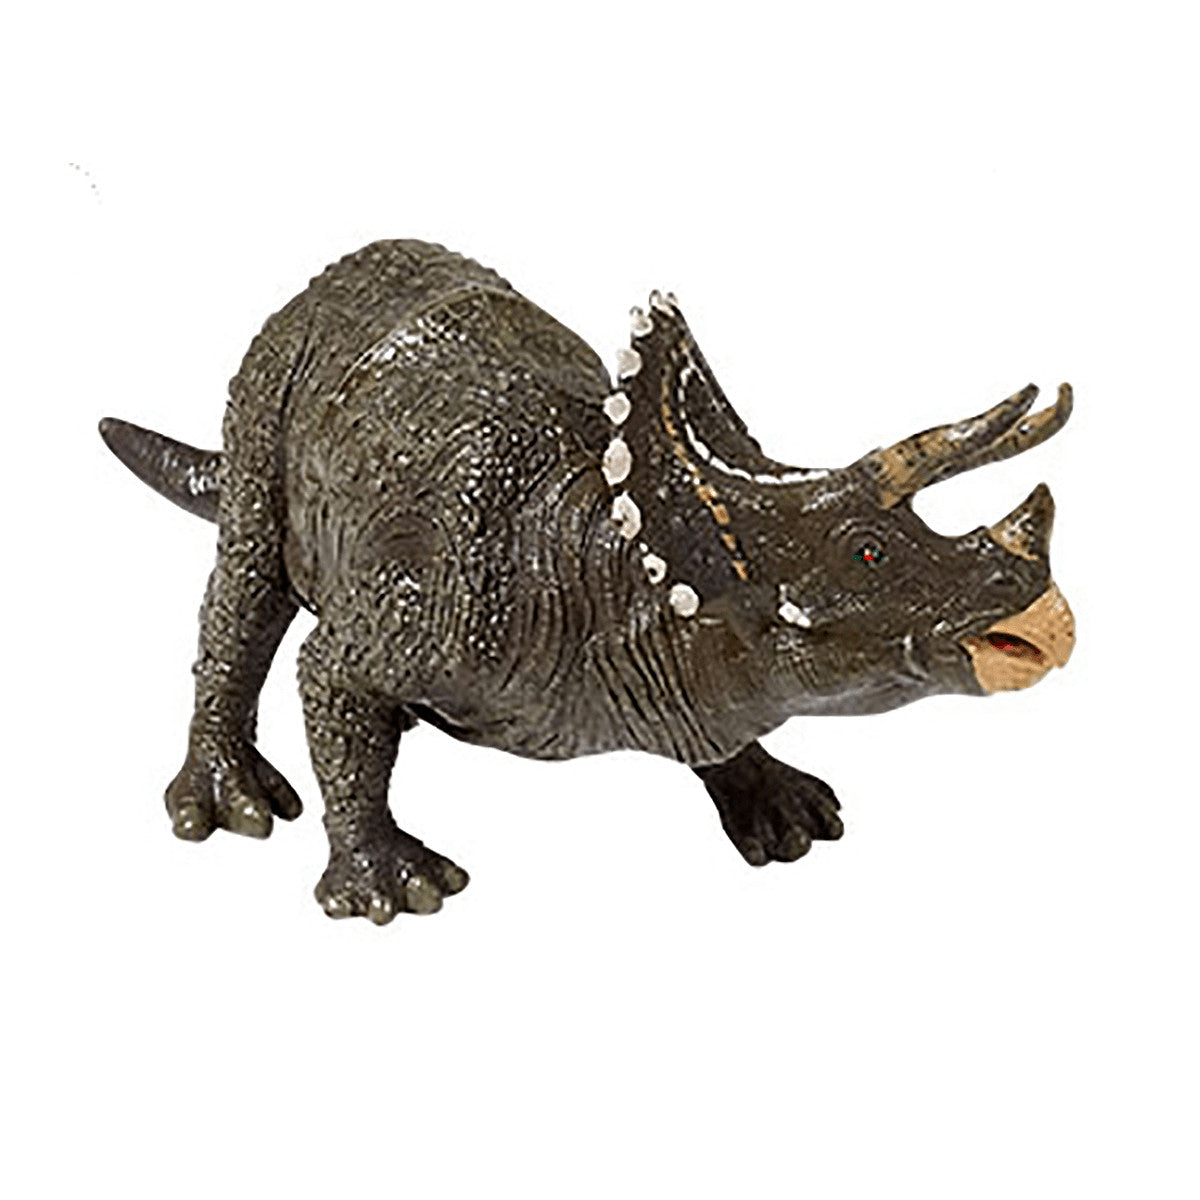 Awesome Animals Large Dinosaur Figurin (Characters Vary)